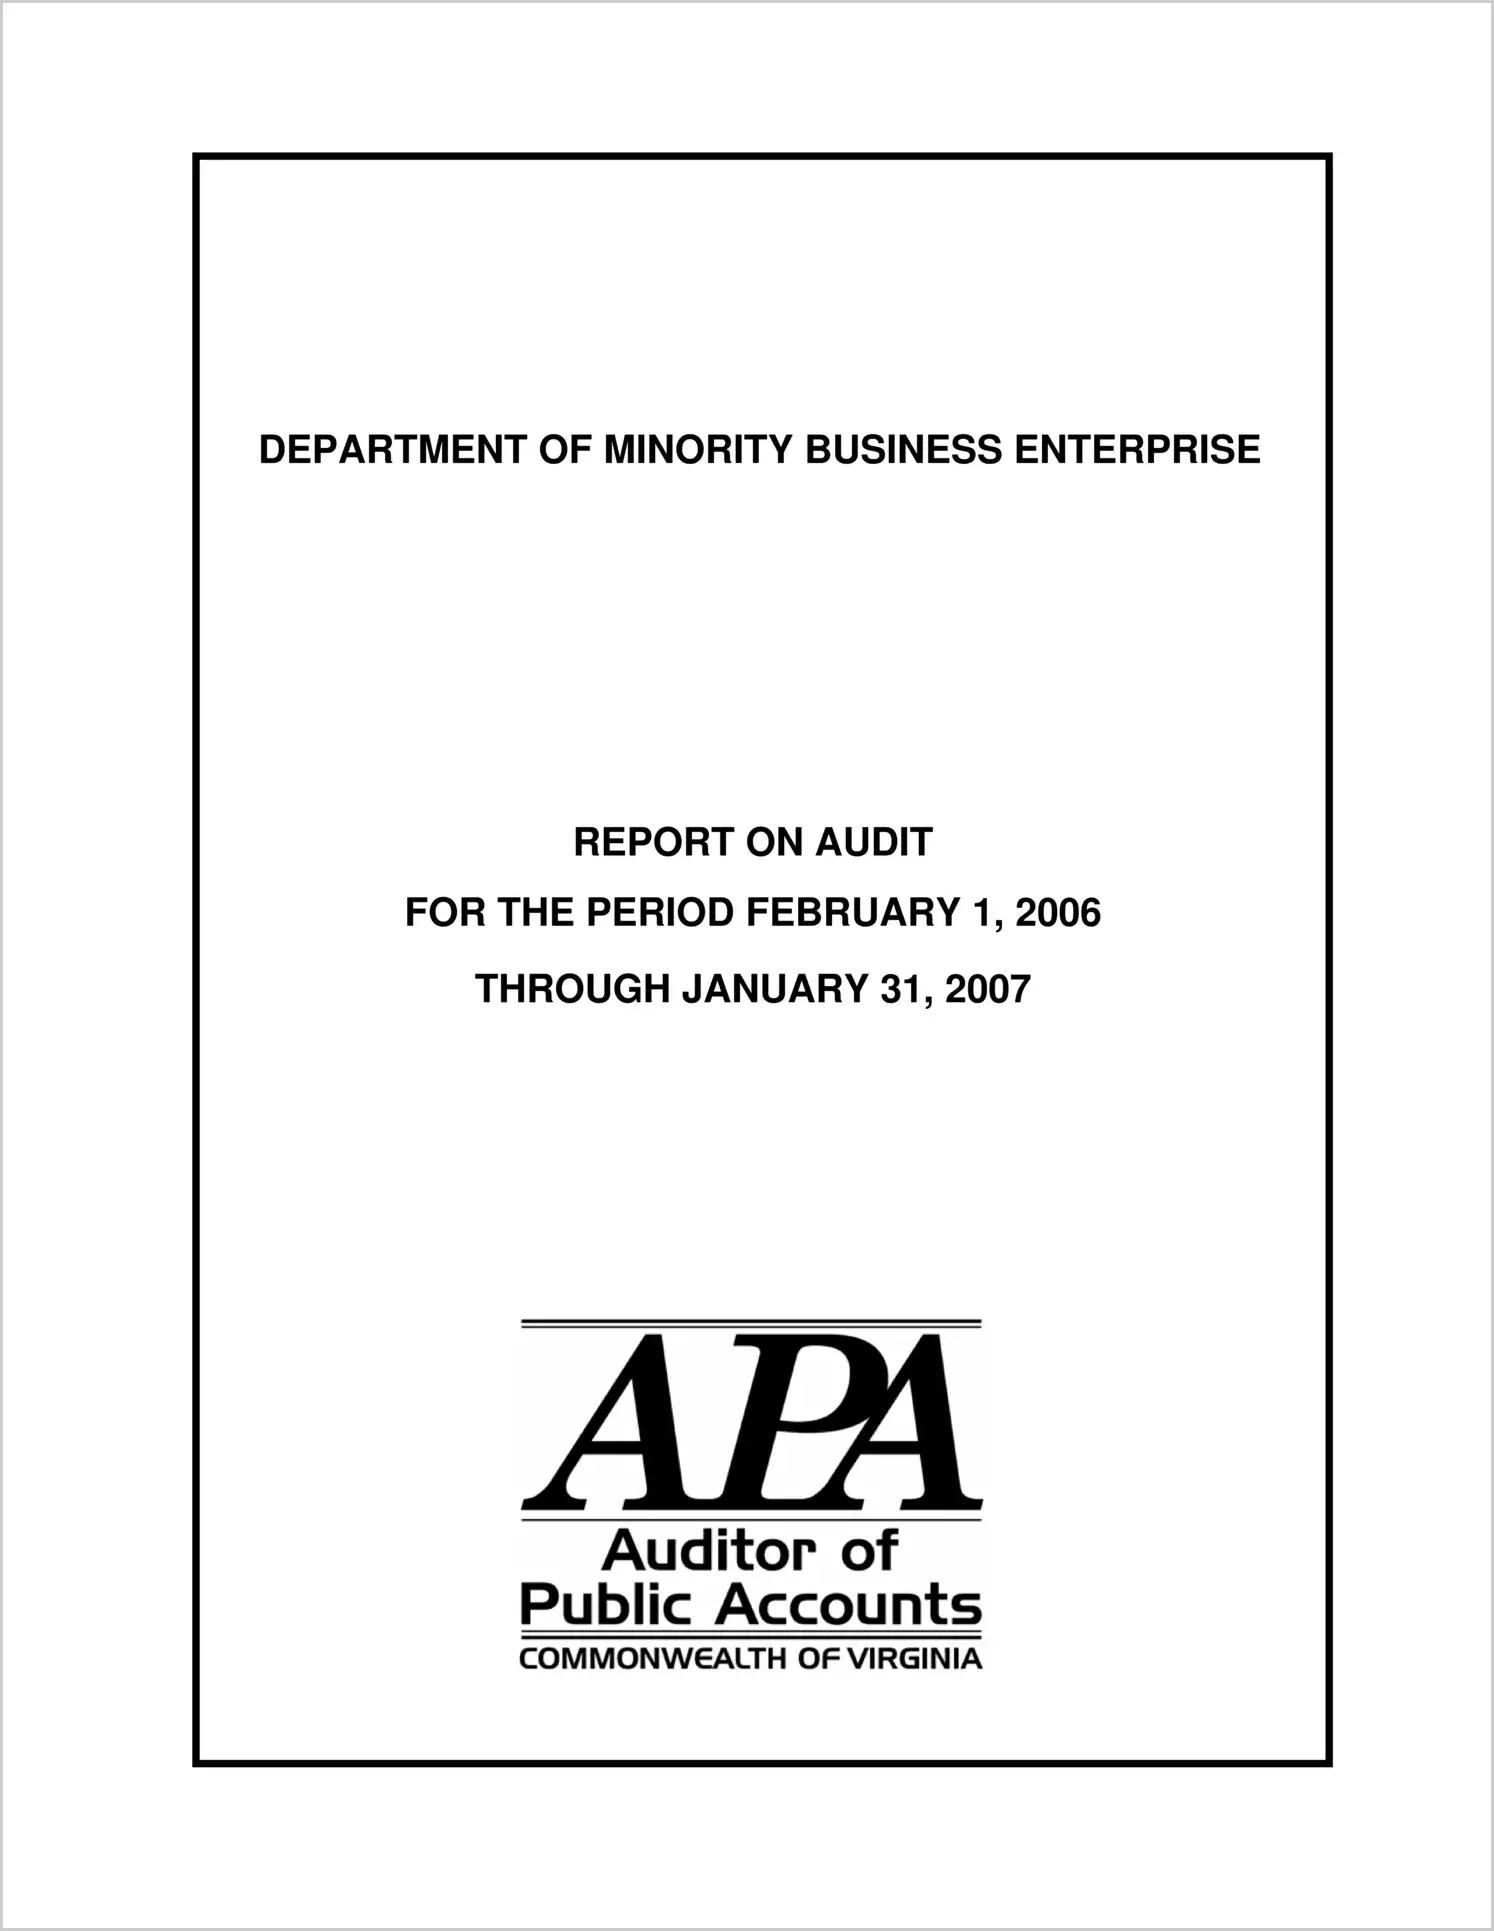 Department of Minority Business Enterprise for the period February 1, 2006  through January 31, 2007